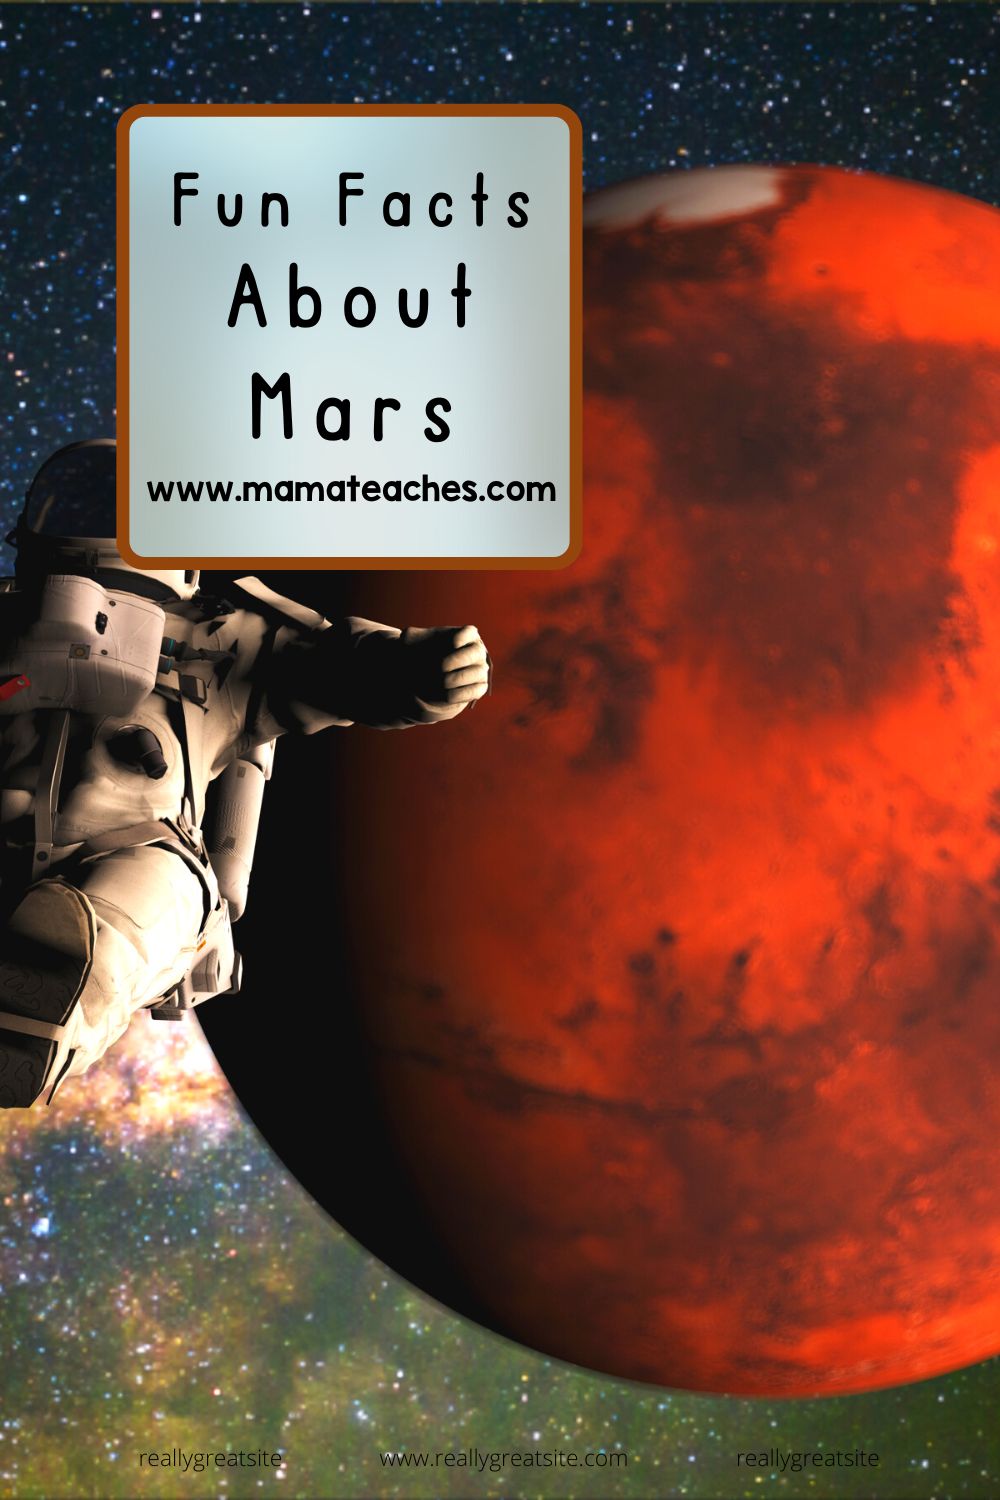 Fun Facrs About Mars